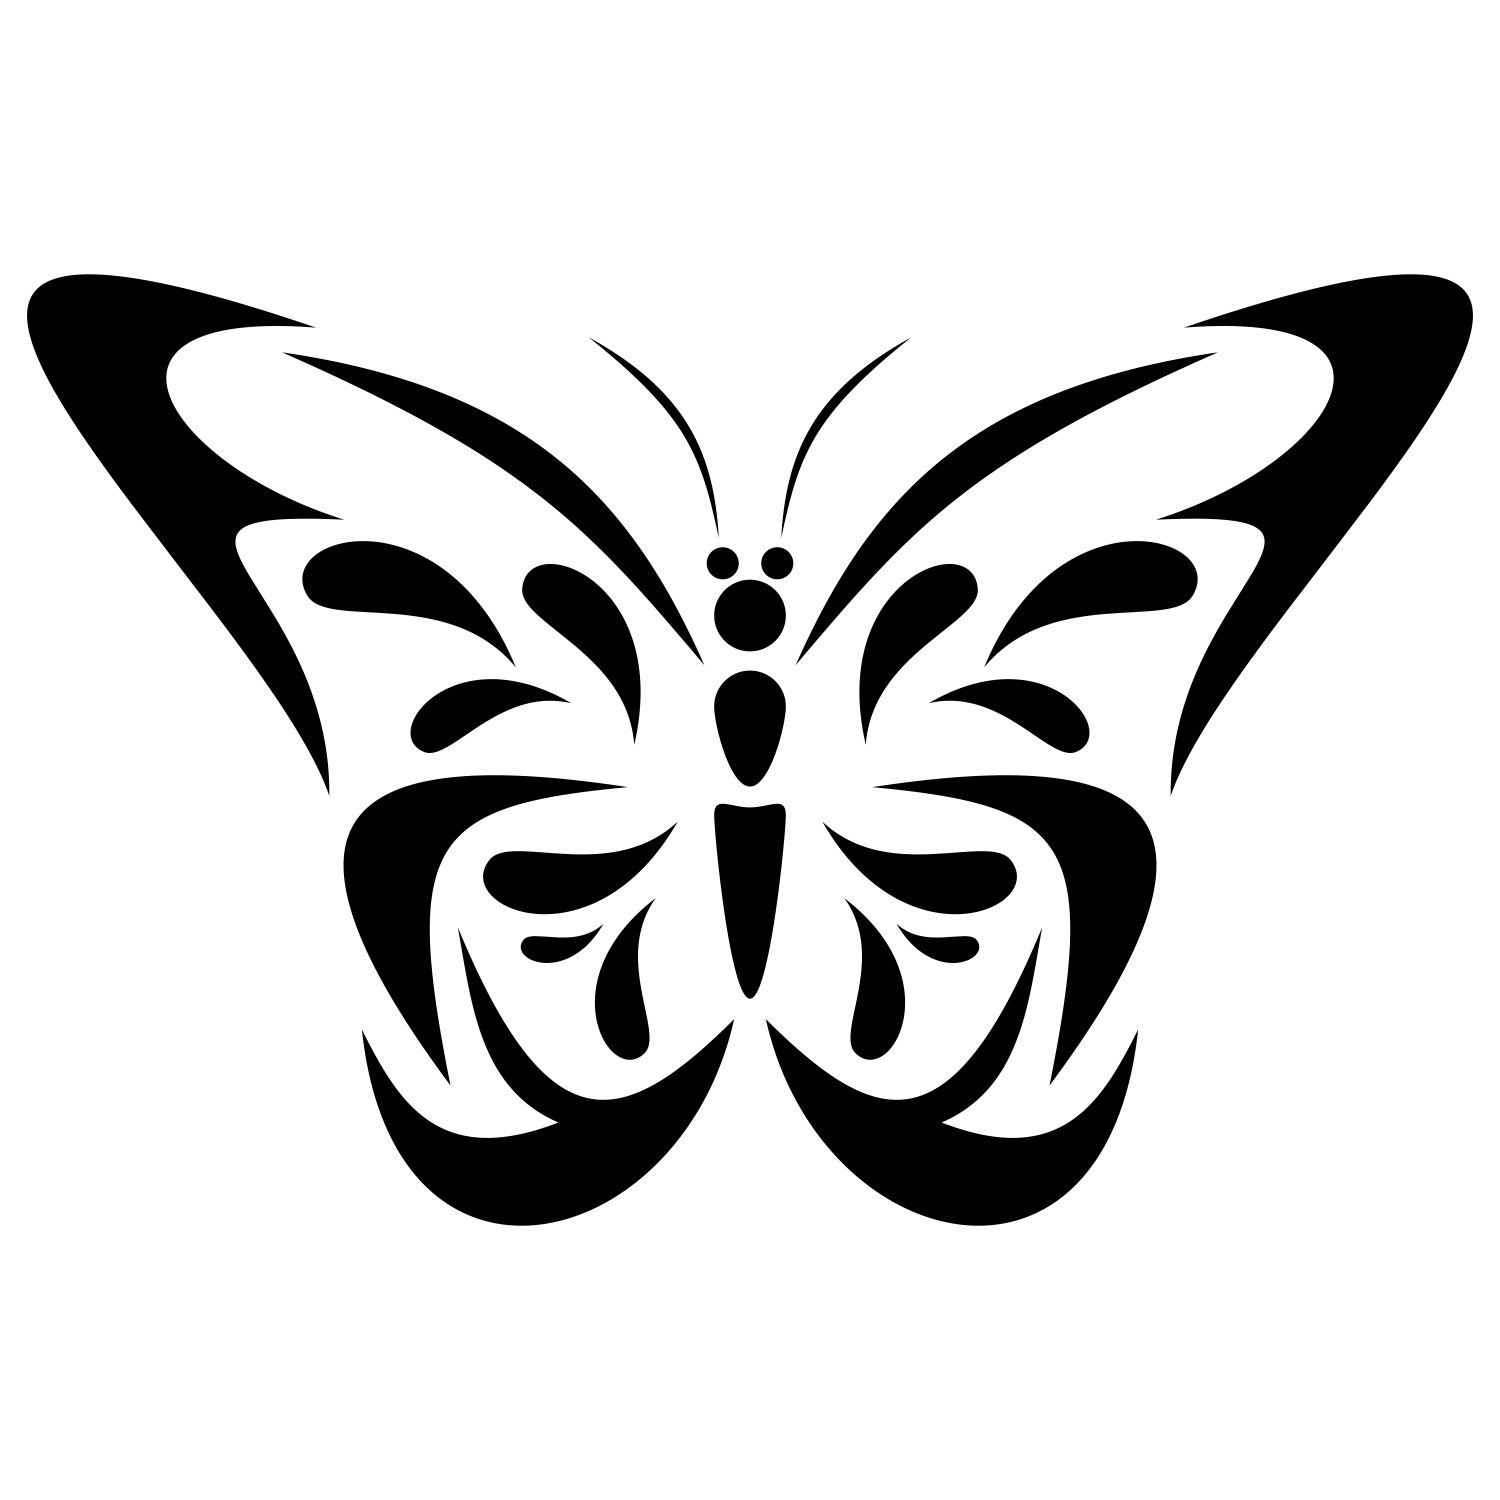 Download Vector for free use: Butterfly vector